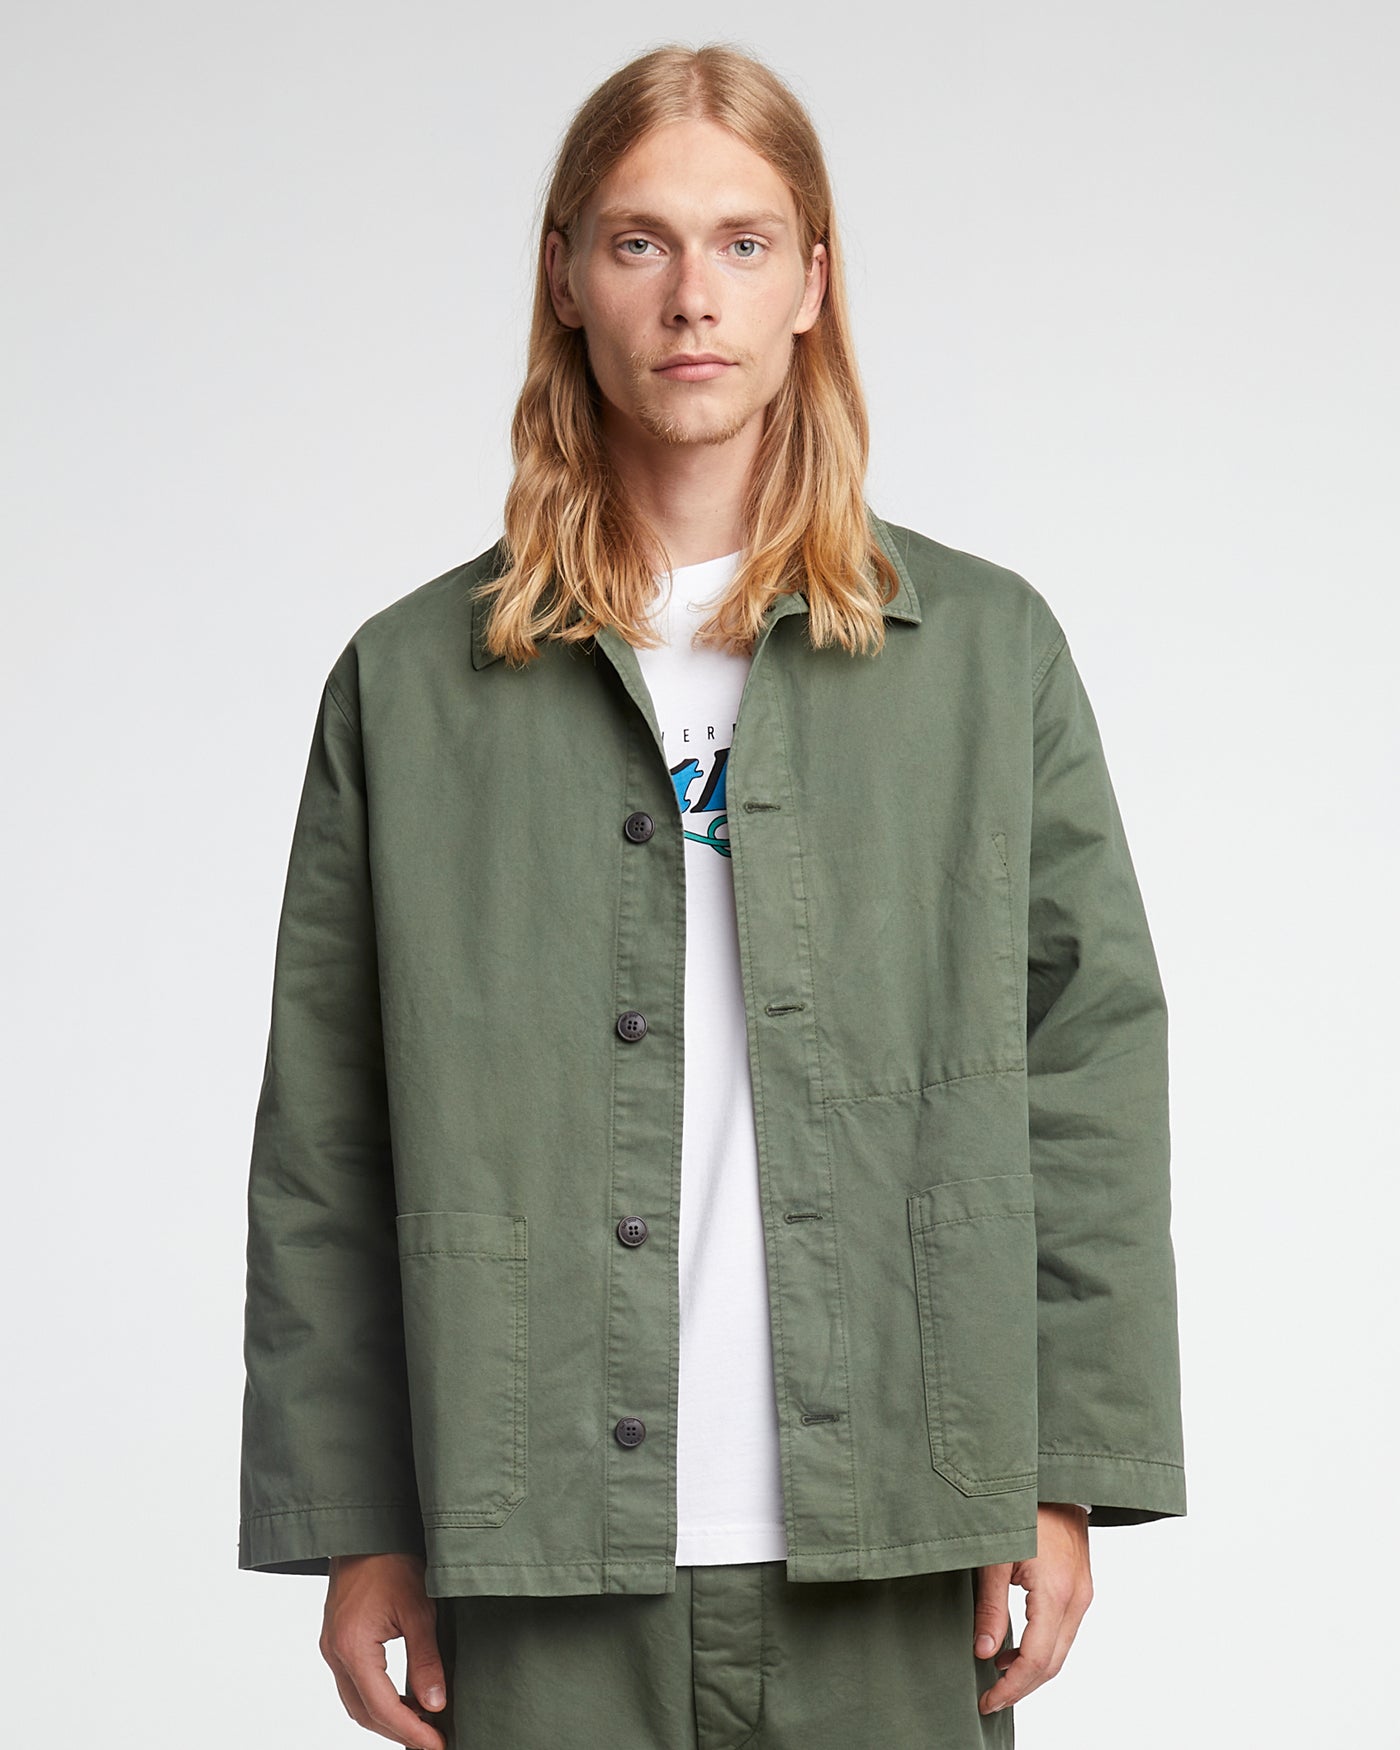 Coach Jacket Recycled Cotton Grape Leaf